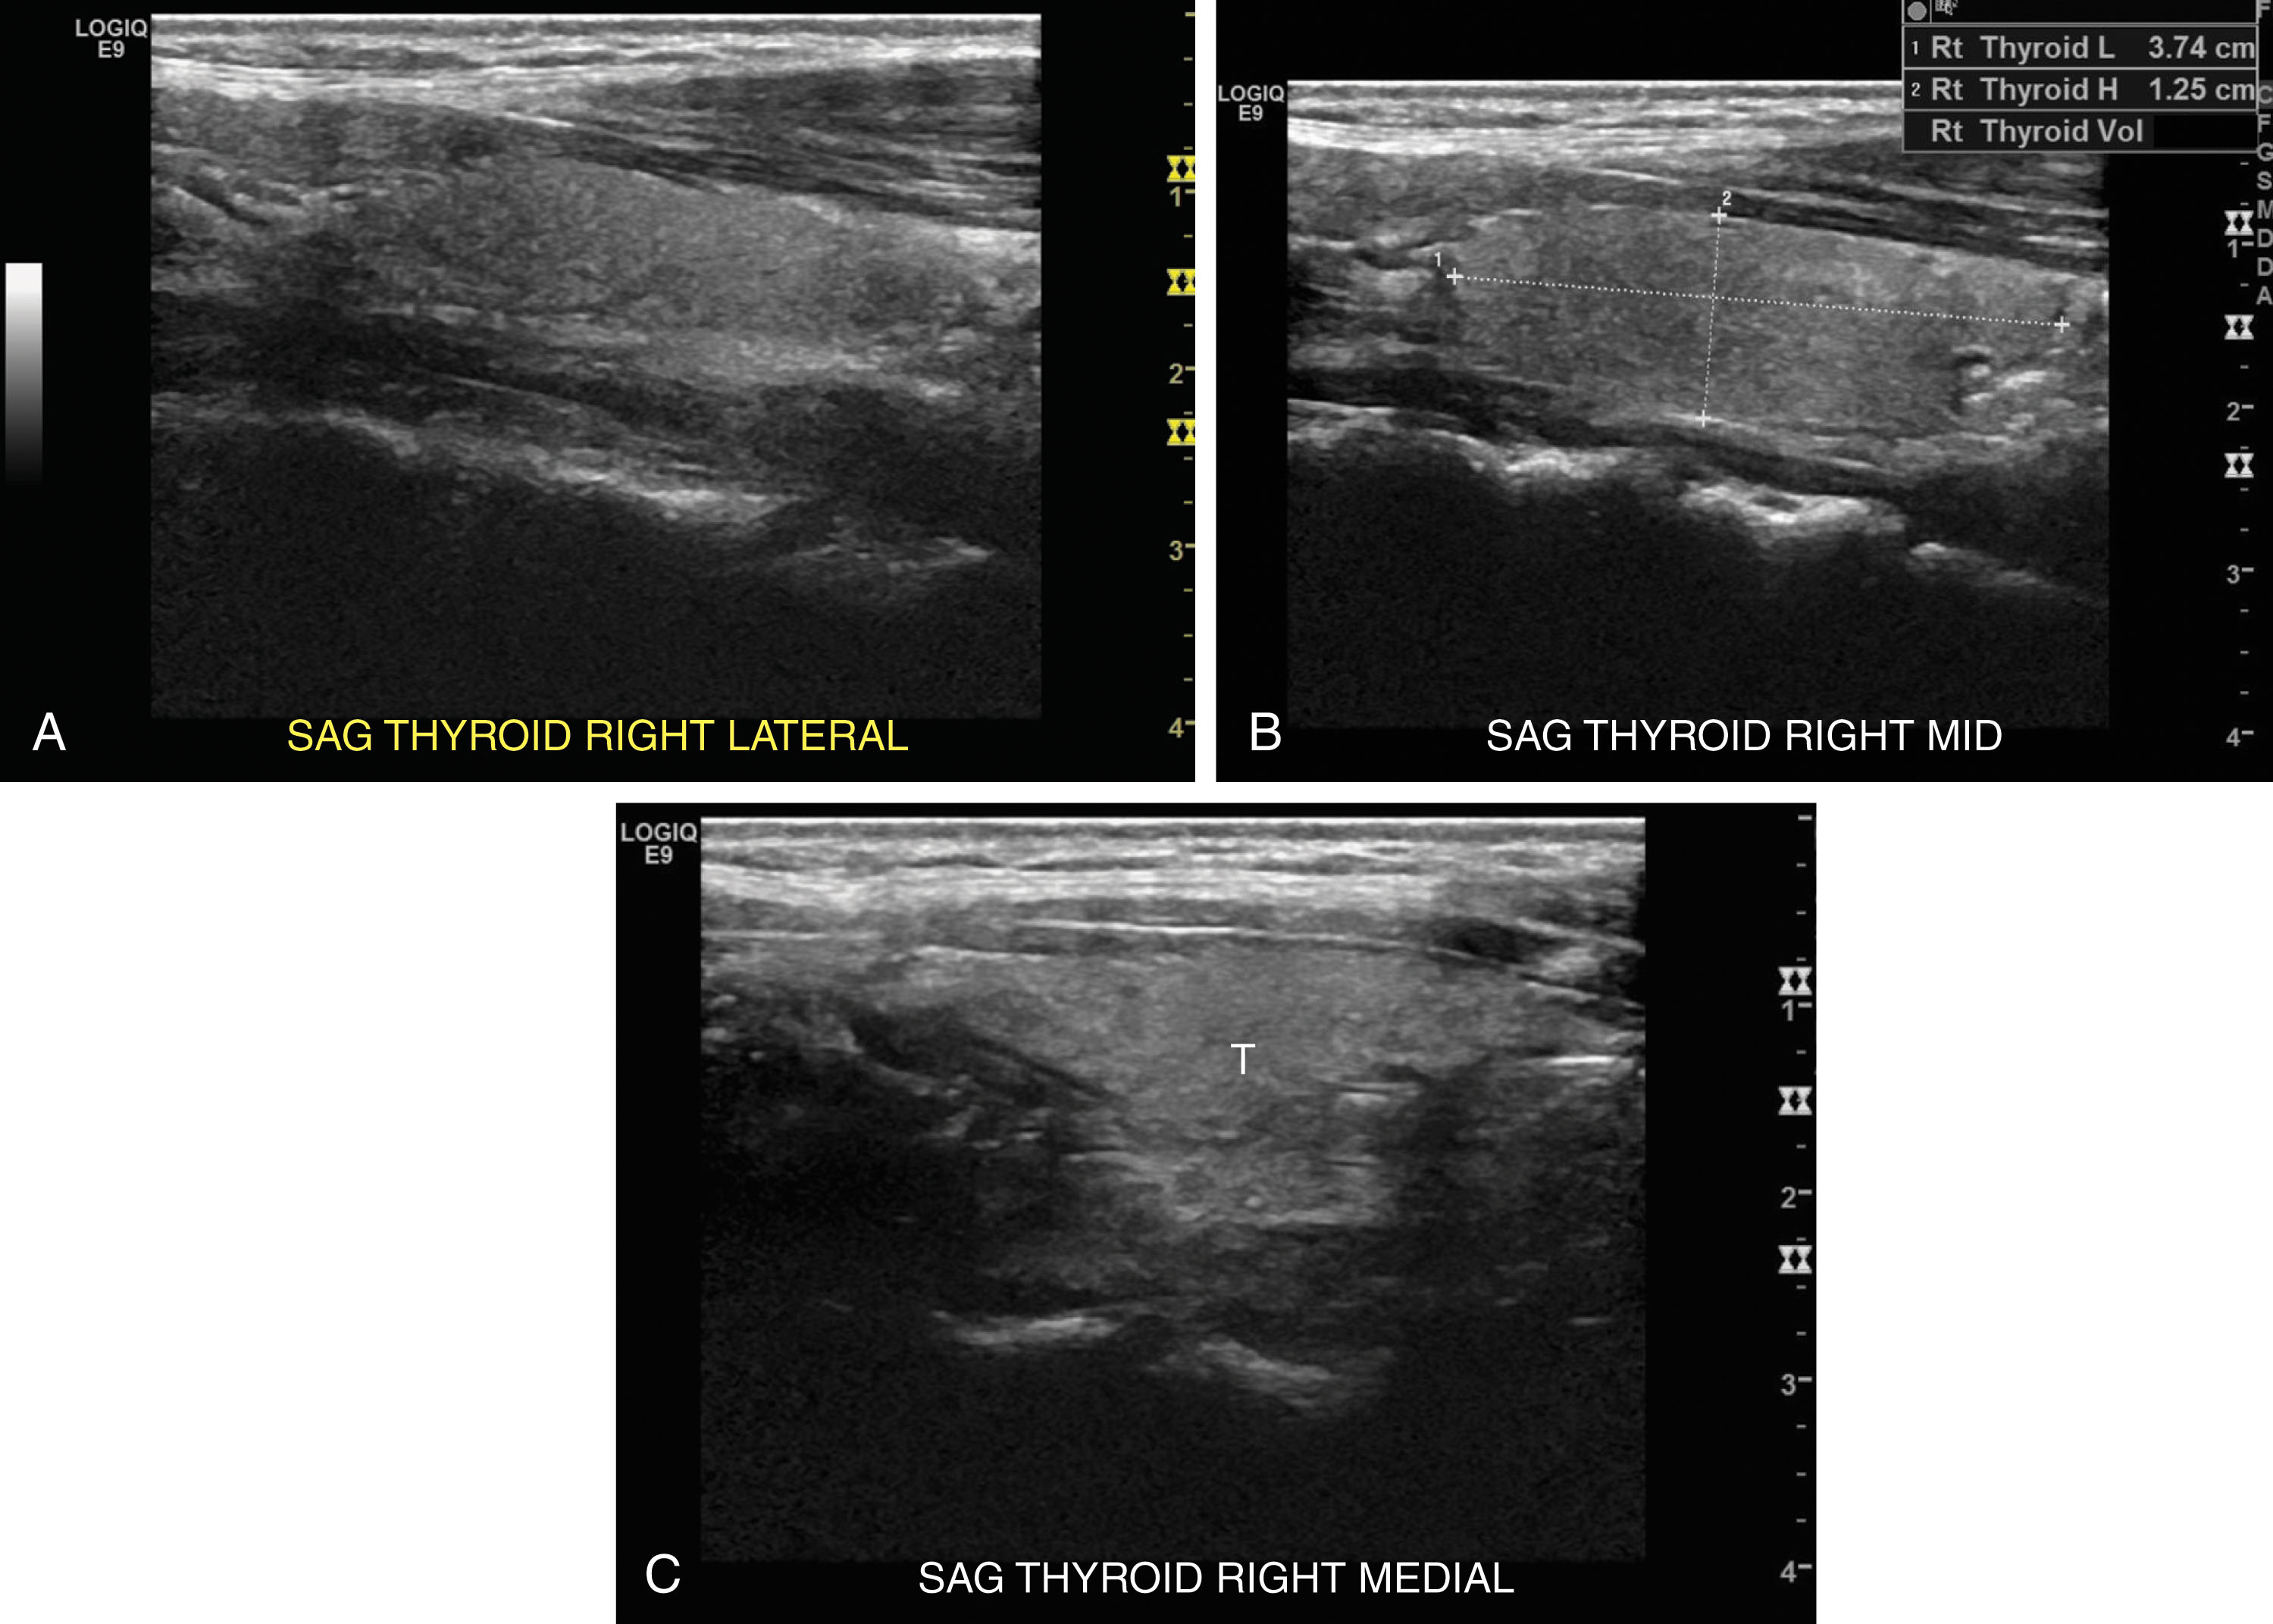 Fig. 22.4, Longitudinal images of the normal thyroid gland. (A) Long, lateral. (B) Long, mid. Measurement of the length and anteroposterior dimension of the gland. (C) Long, medial. T , Thyroid.